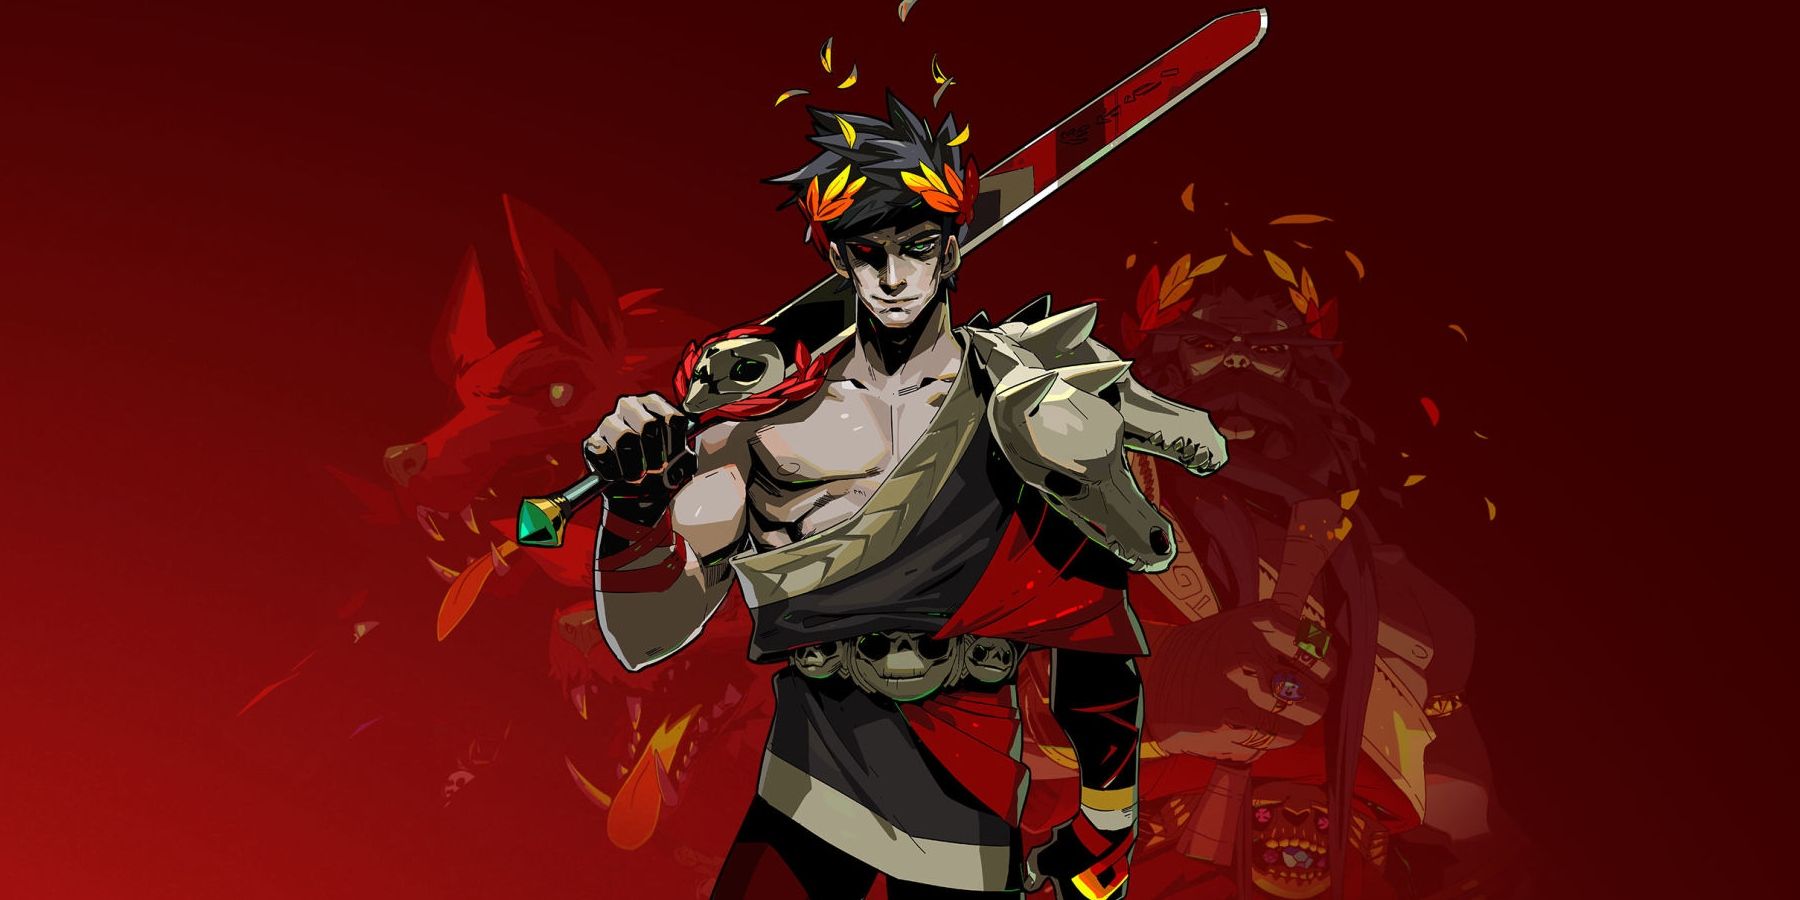 Roguelike video game Hades coming to Netflix, featuring Zagreus holding a sword